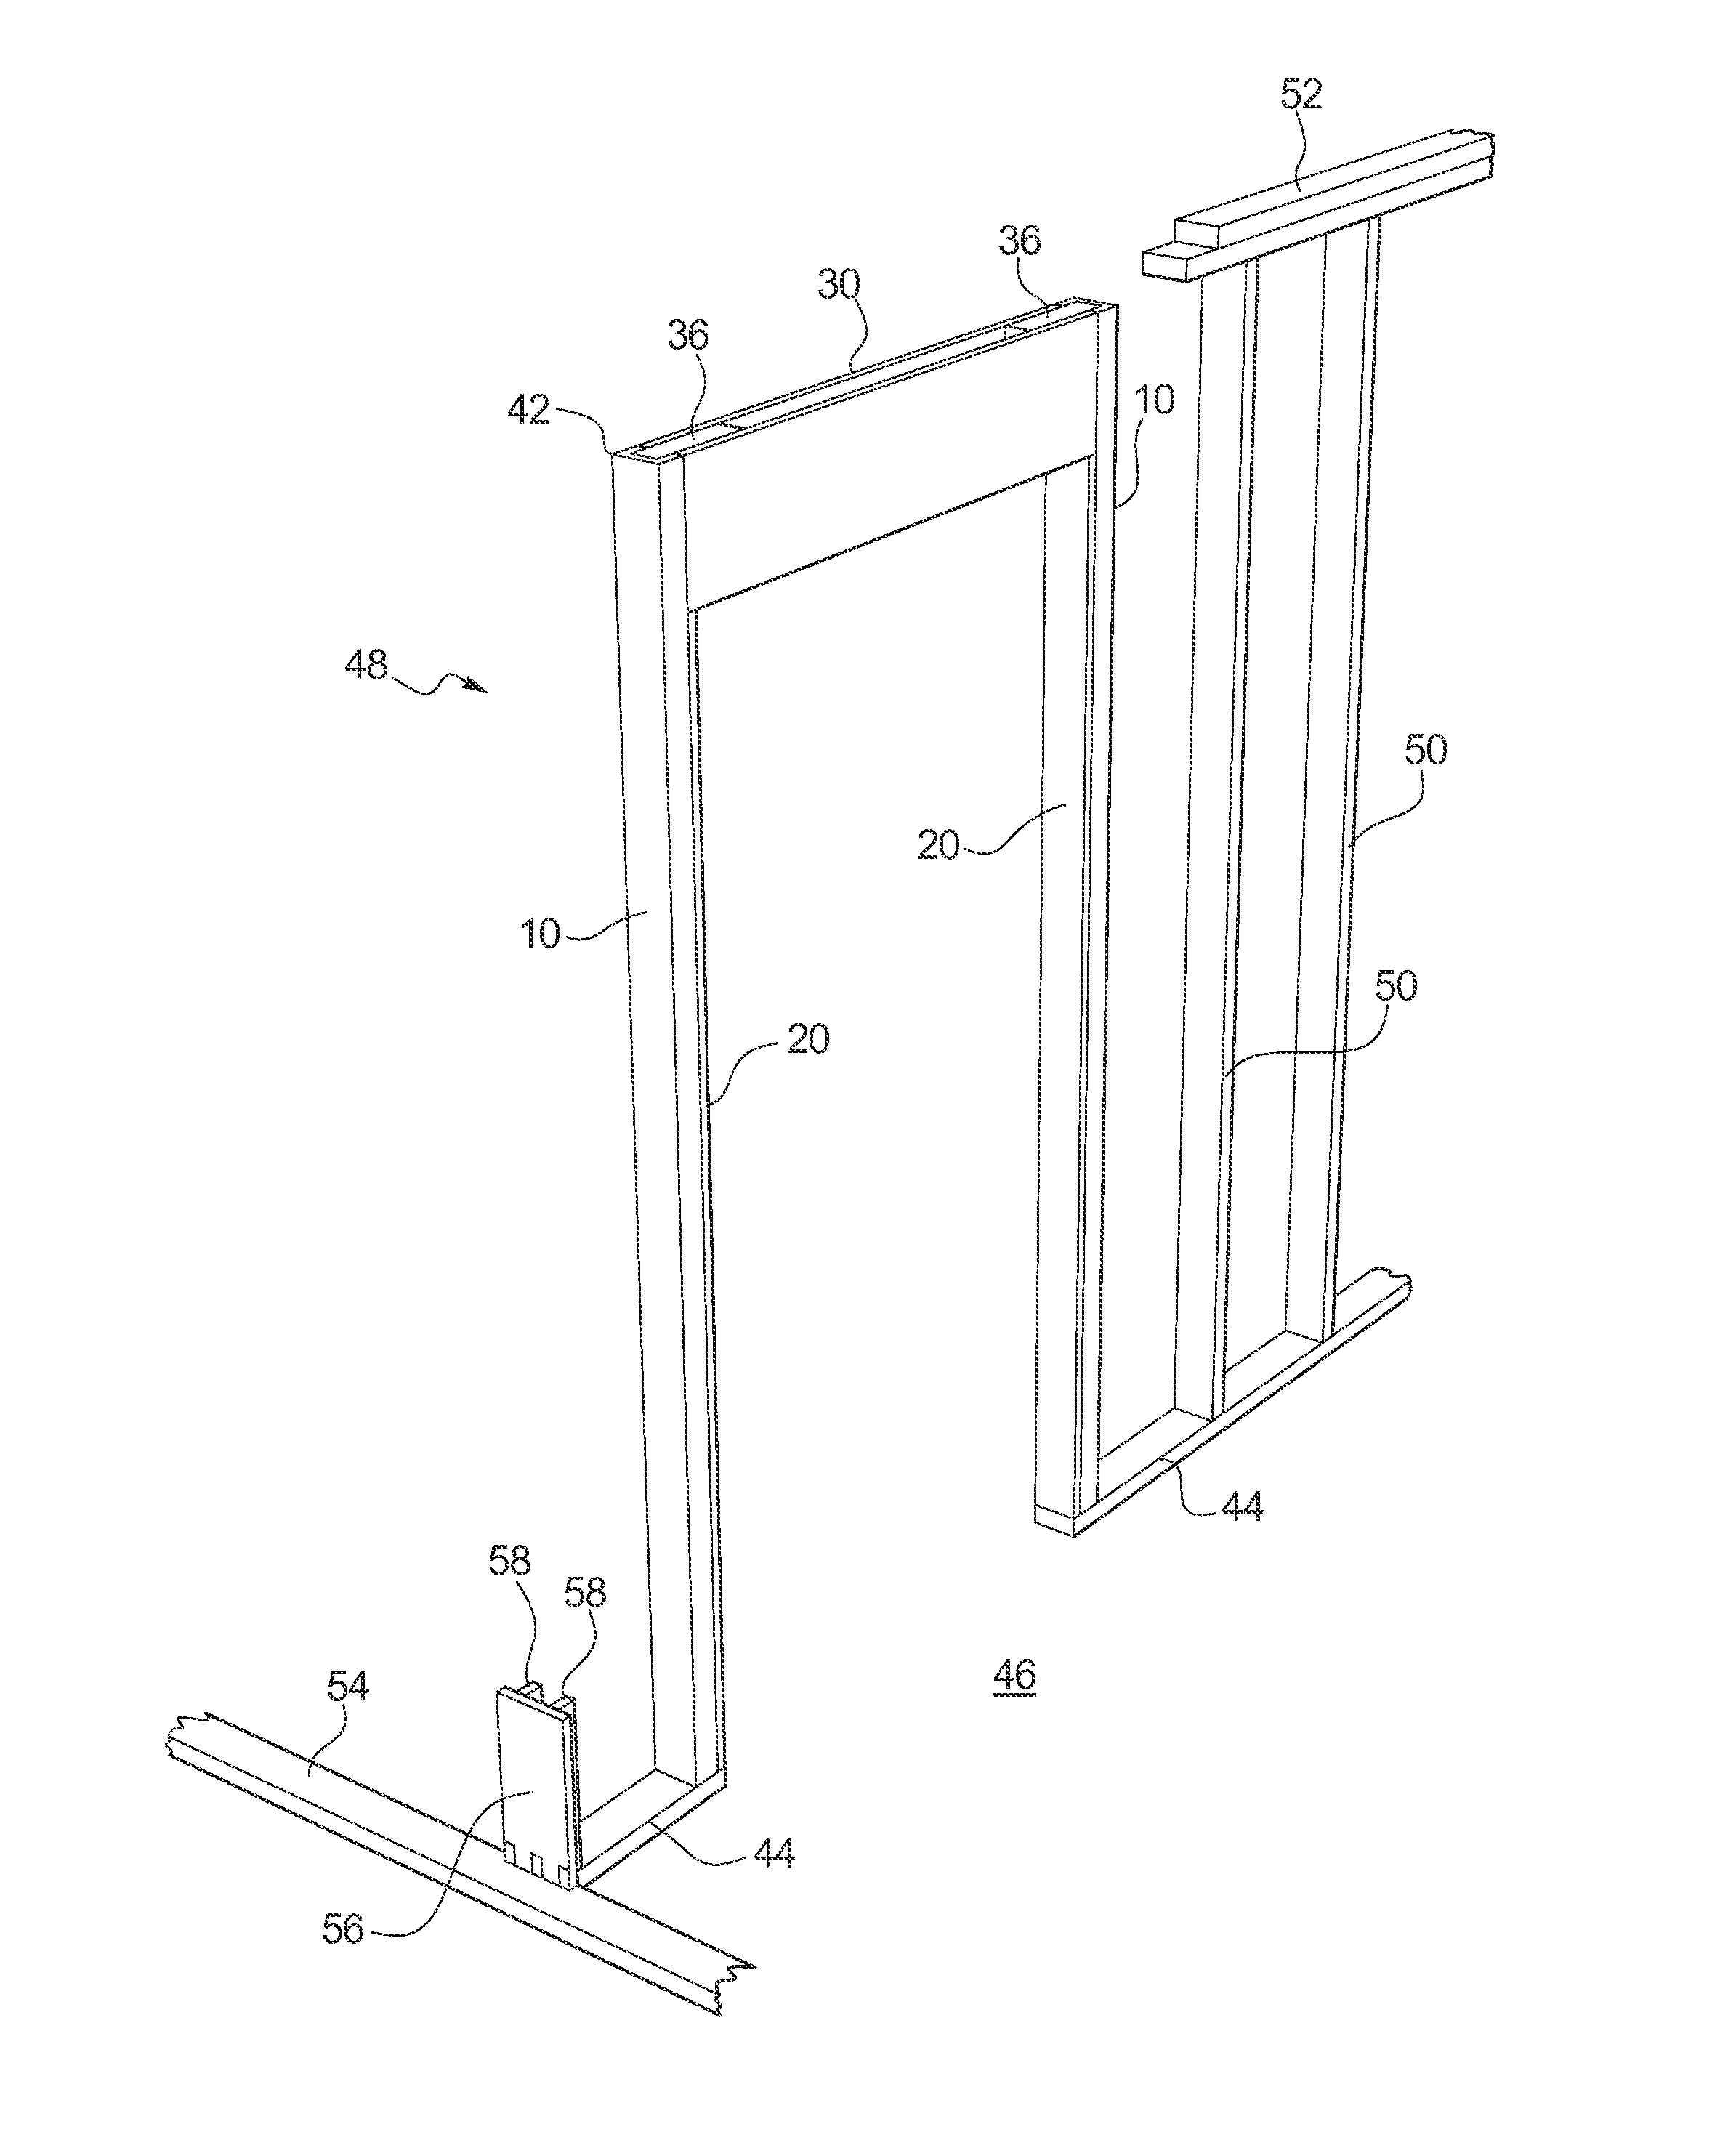 Pre-Fabricated Structural Framing Kit and Method